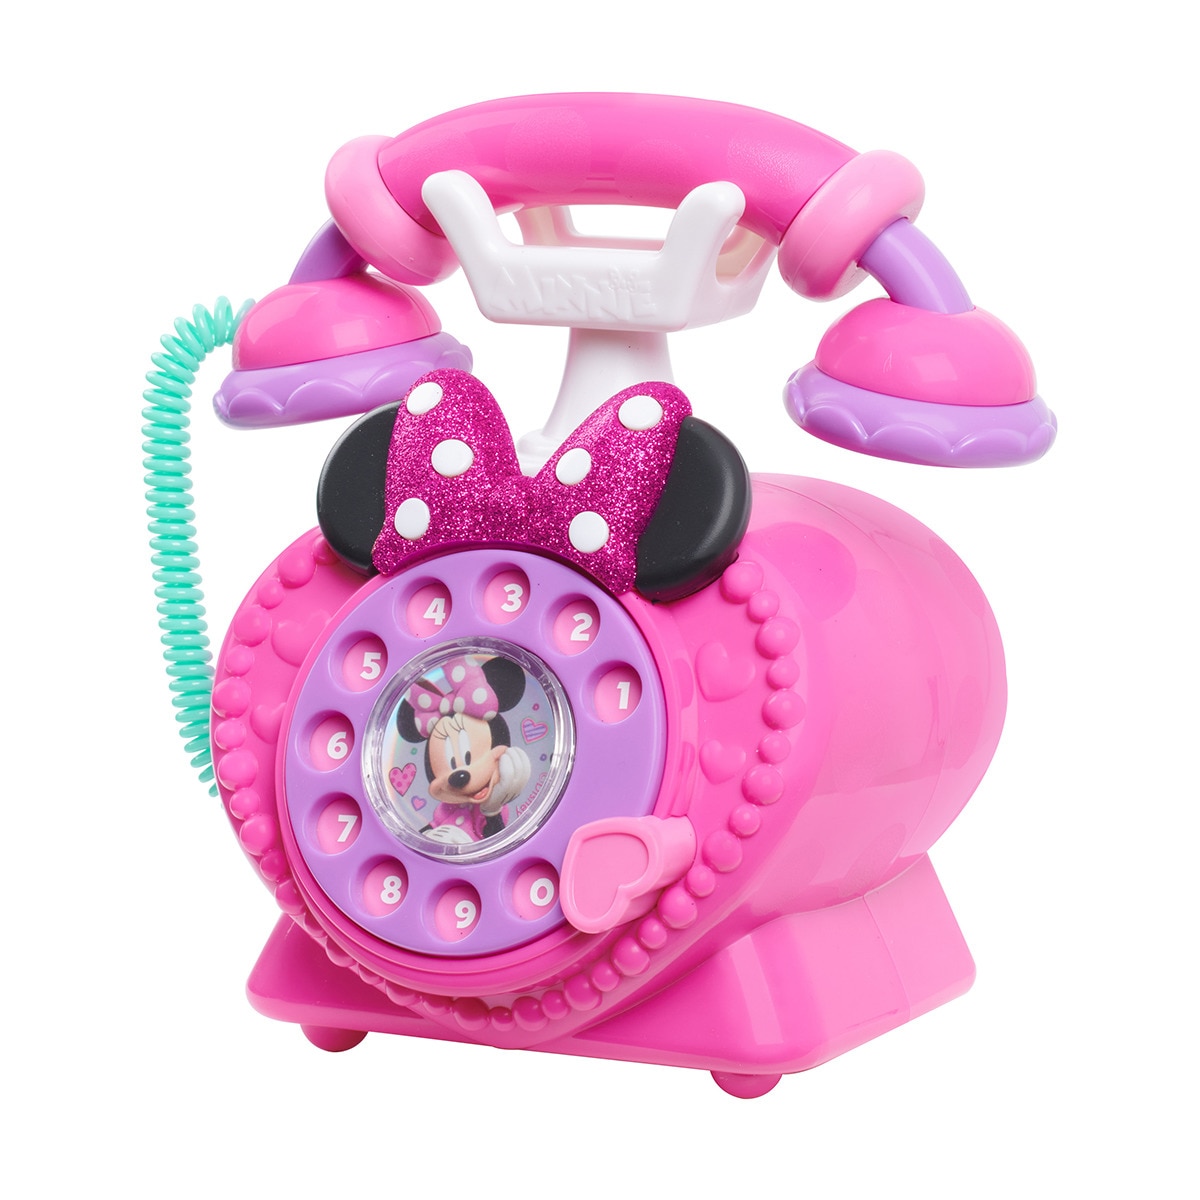 Just Play Products - Teléfono tradicional giratorio Ring Me Minnie Mouse Disney Just Play.